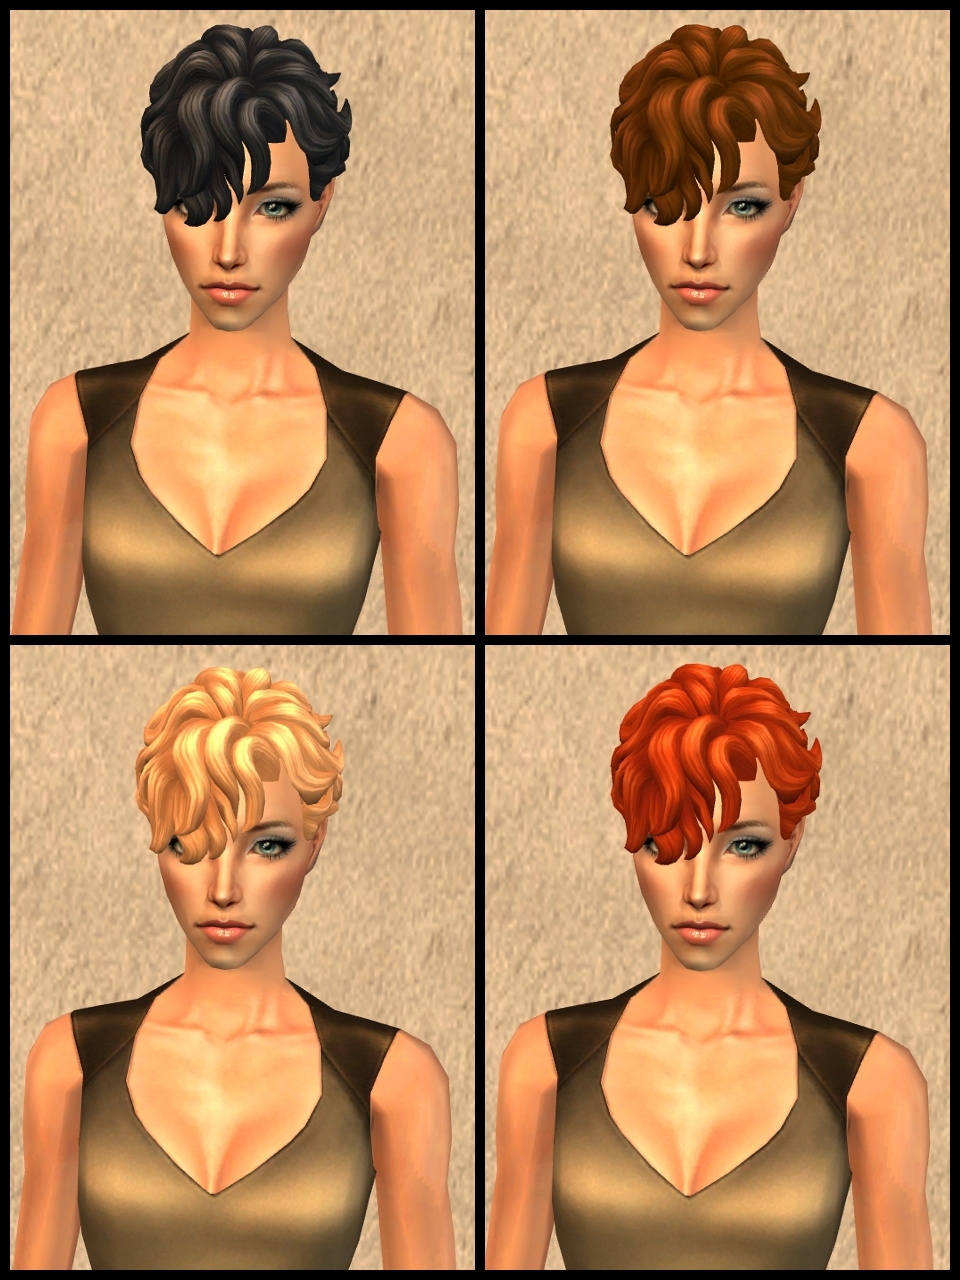 83 3t2 hairs in Remi's textures and new colours. ...